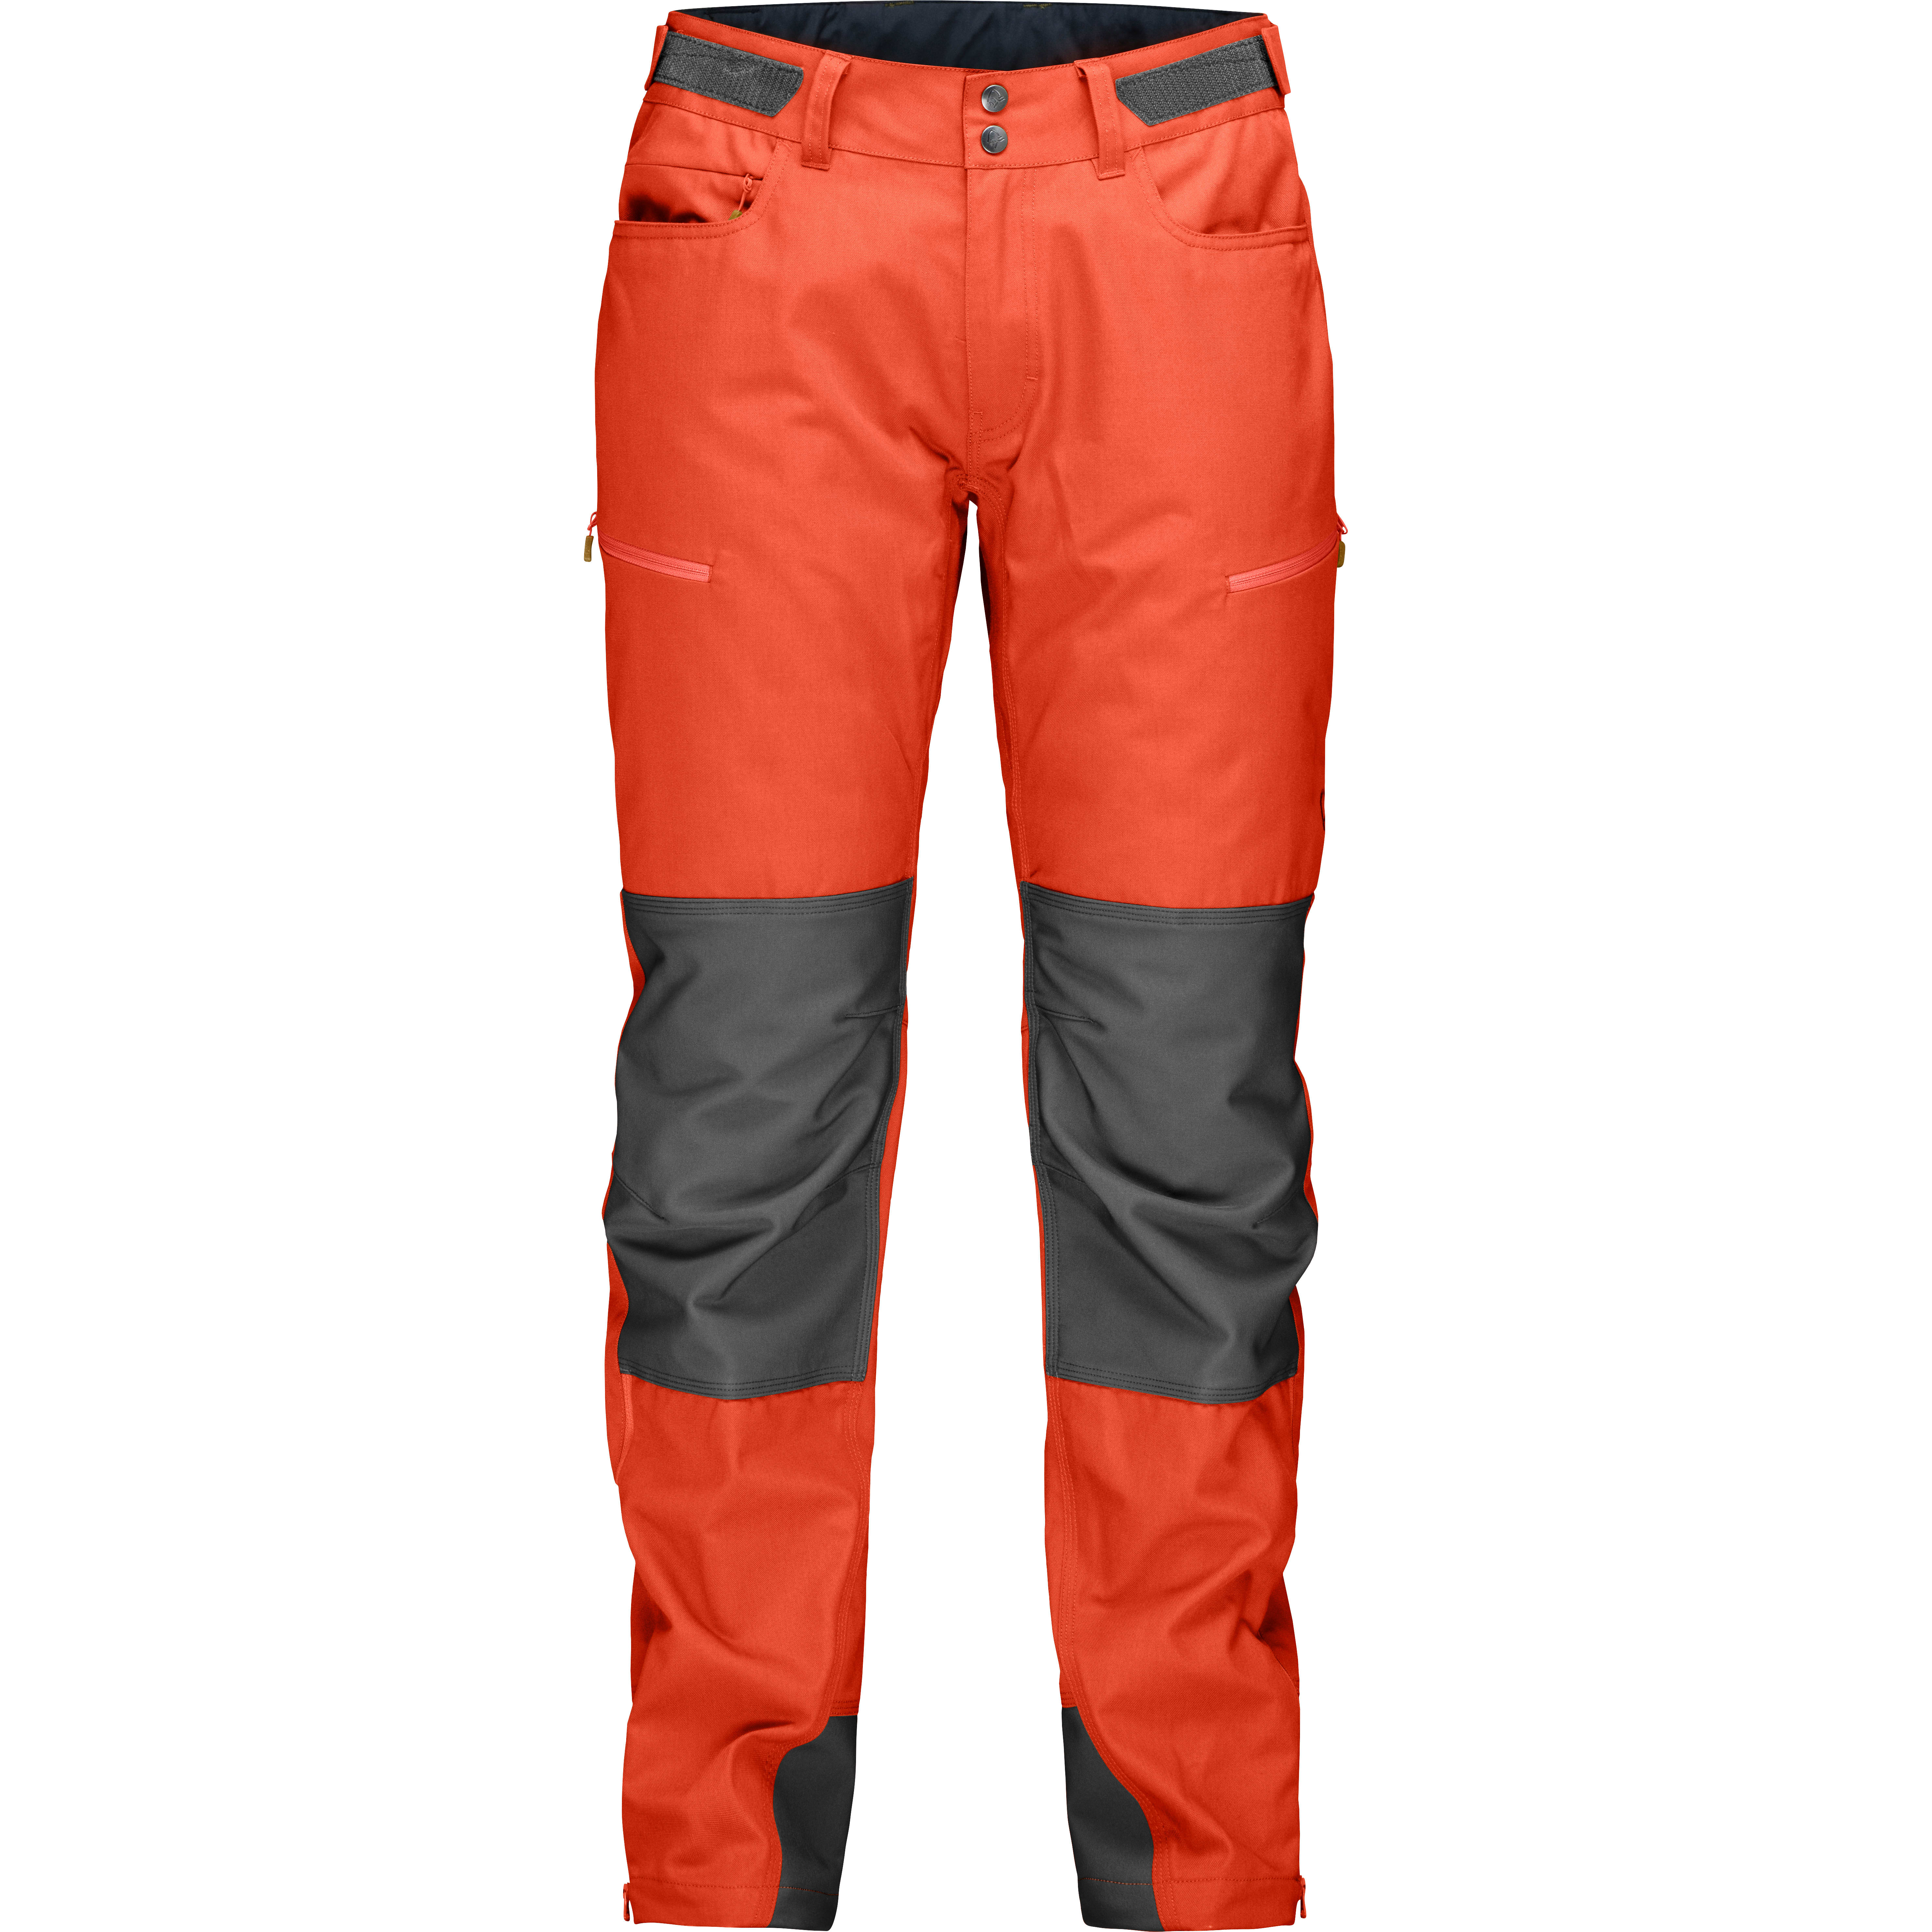 Details about   Norrona Svalbard Heavy Duty Pants Men's size M Hybrid Trousers Hiking 